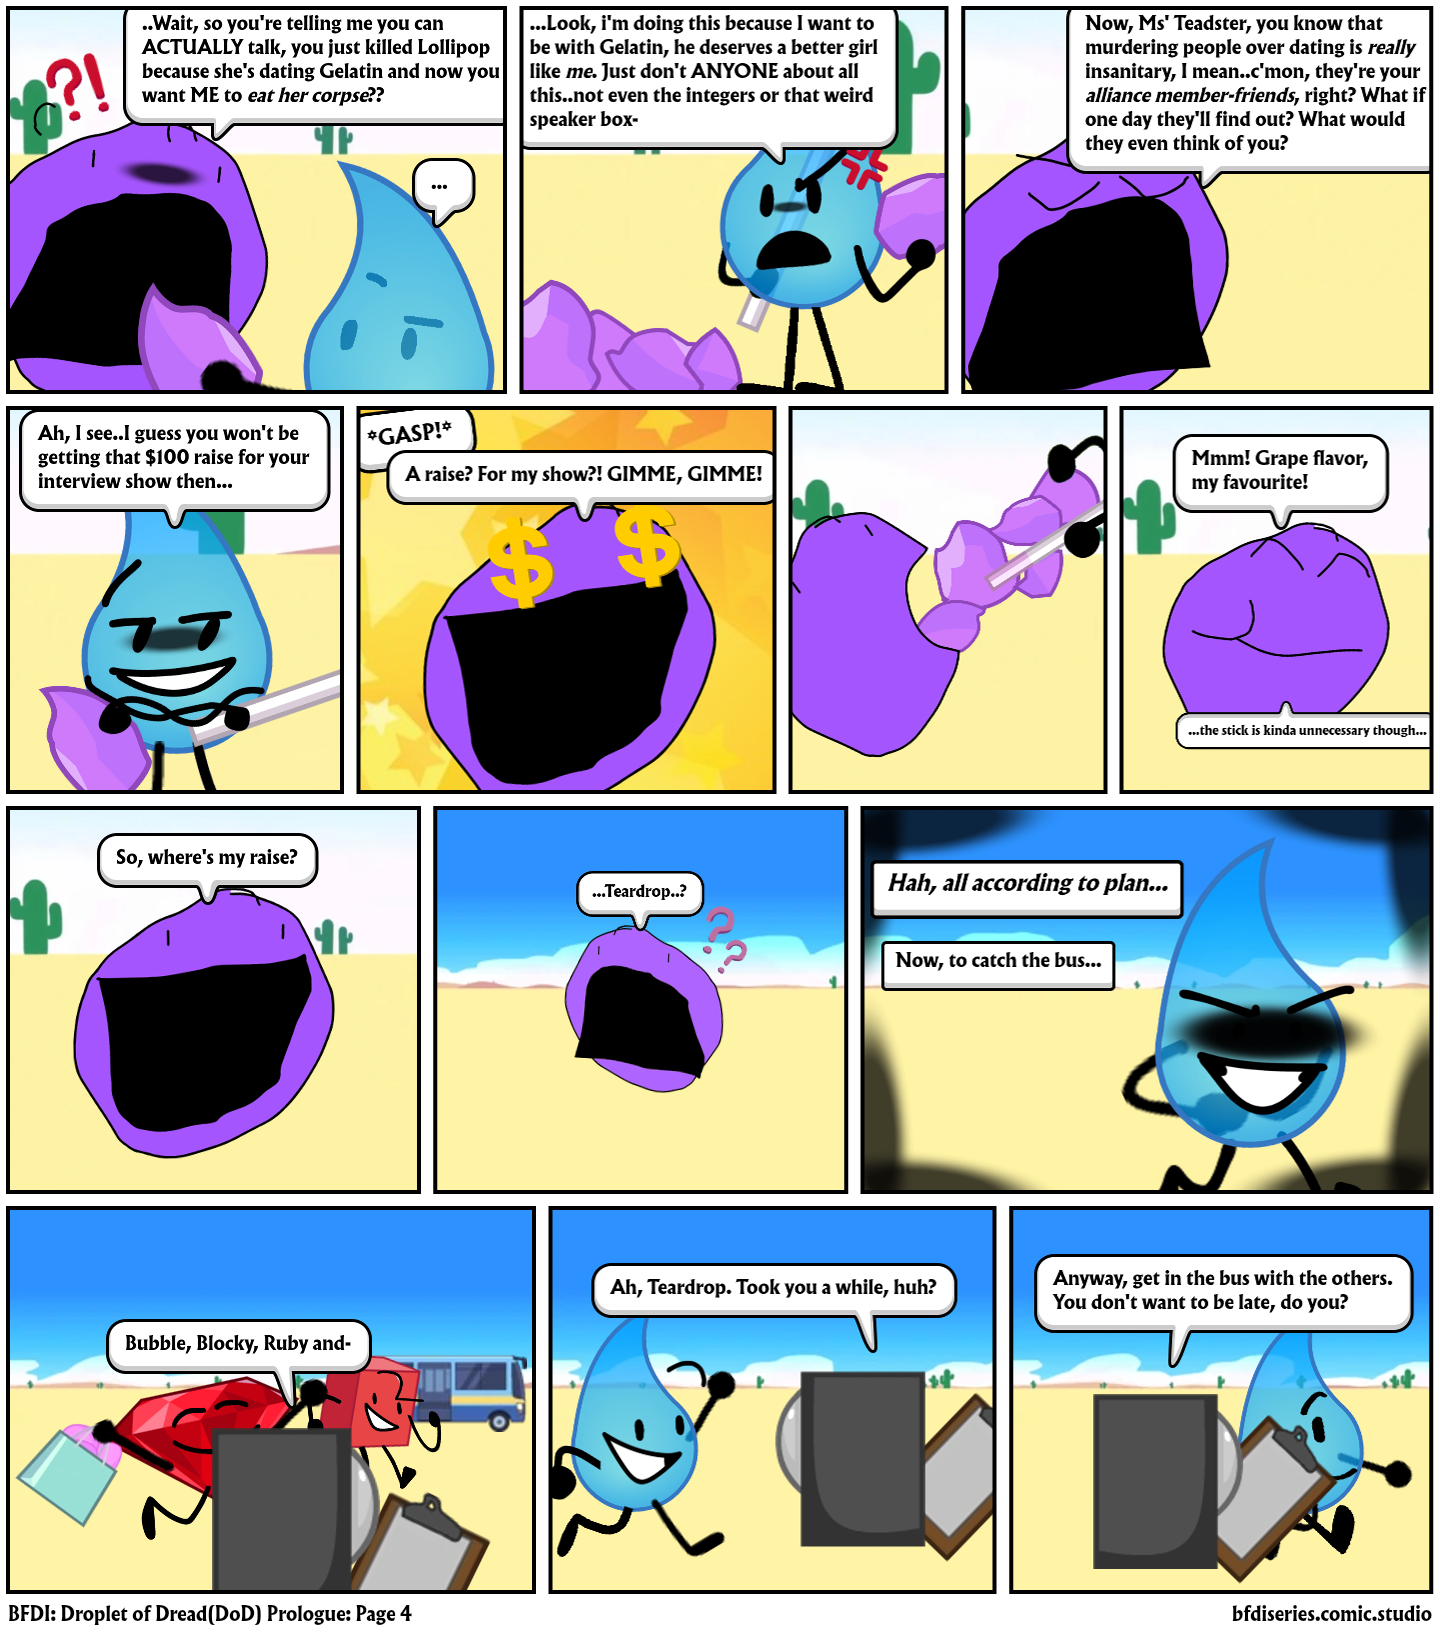 How to get this Poorly Version of ded 15 in bfdi comic studio